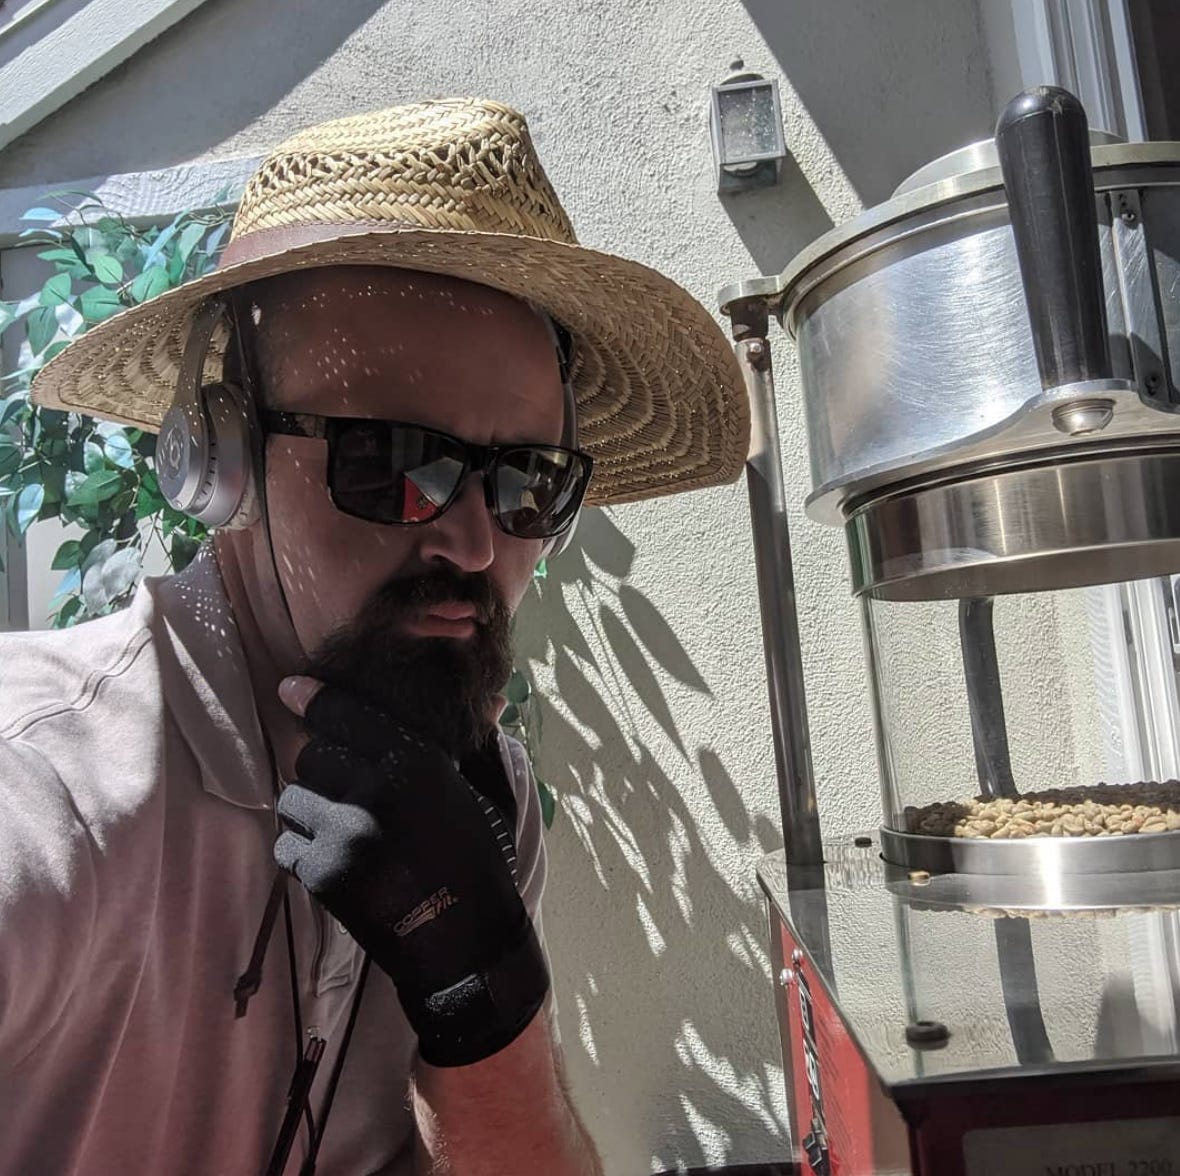 Stephen Crocker caressing his goatee and posing next to his sonos fresco coffee roaster. He's wearing a floppy sun hat, headphones and black sunglasses.